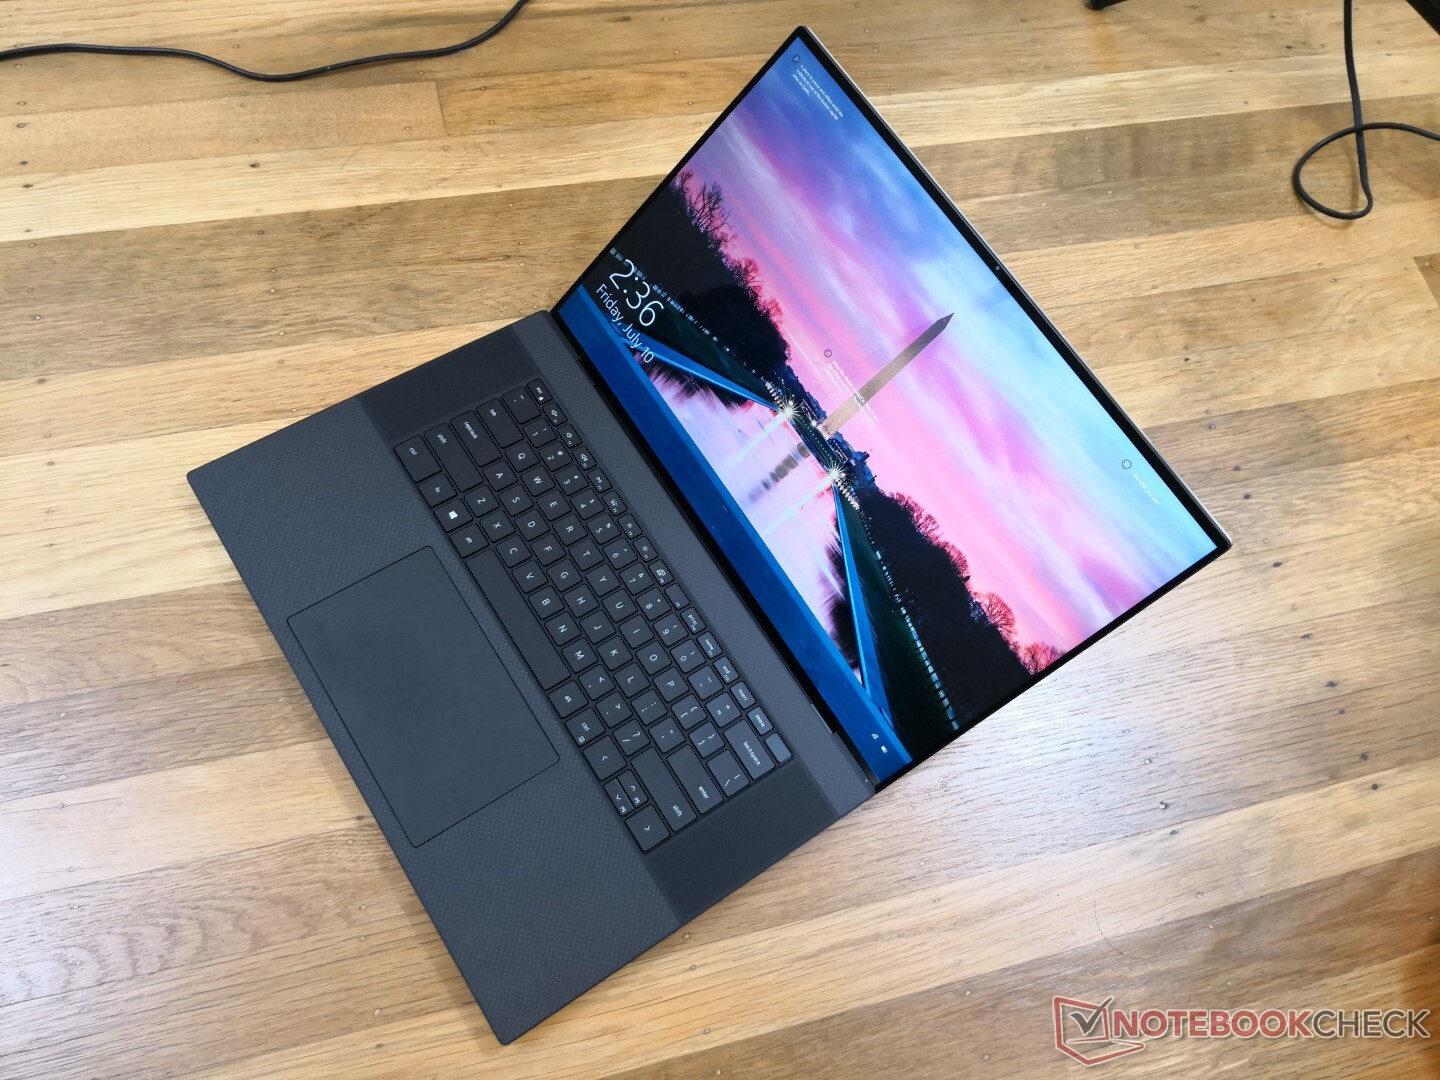 Dell Xps 17 9700 Facing Worrying Charging Issues Drops From 100 Percent To 65 Percent Battery While Plugged In Notebookcheck Net News